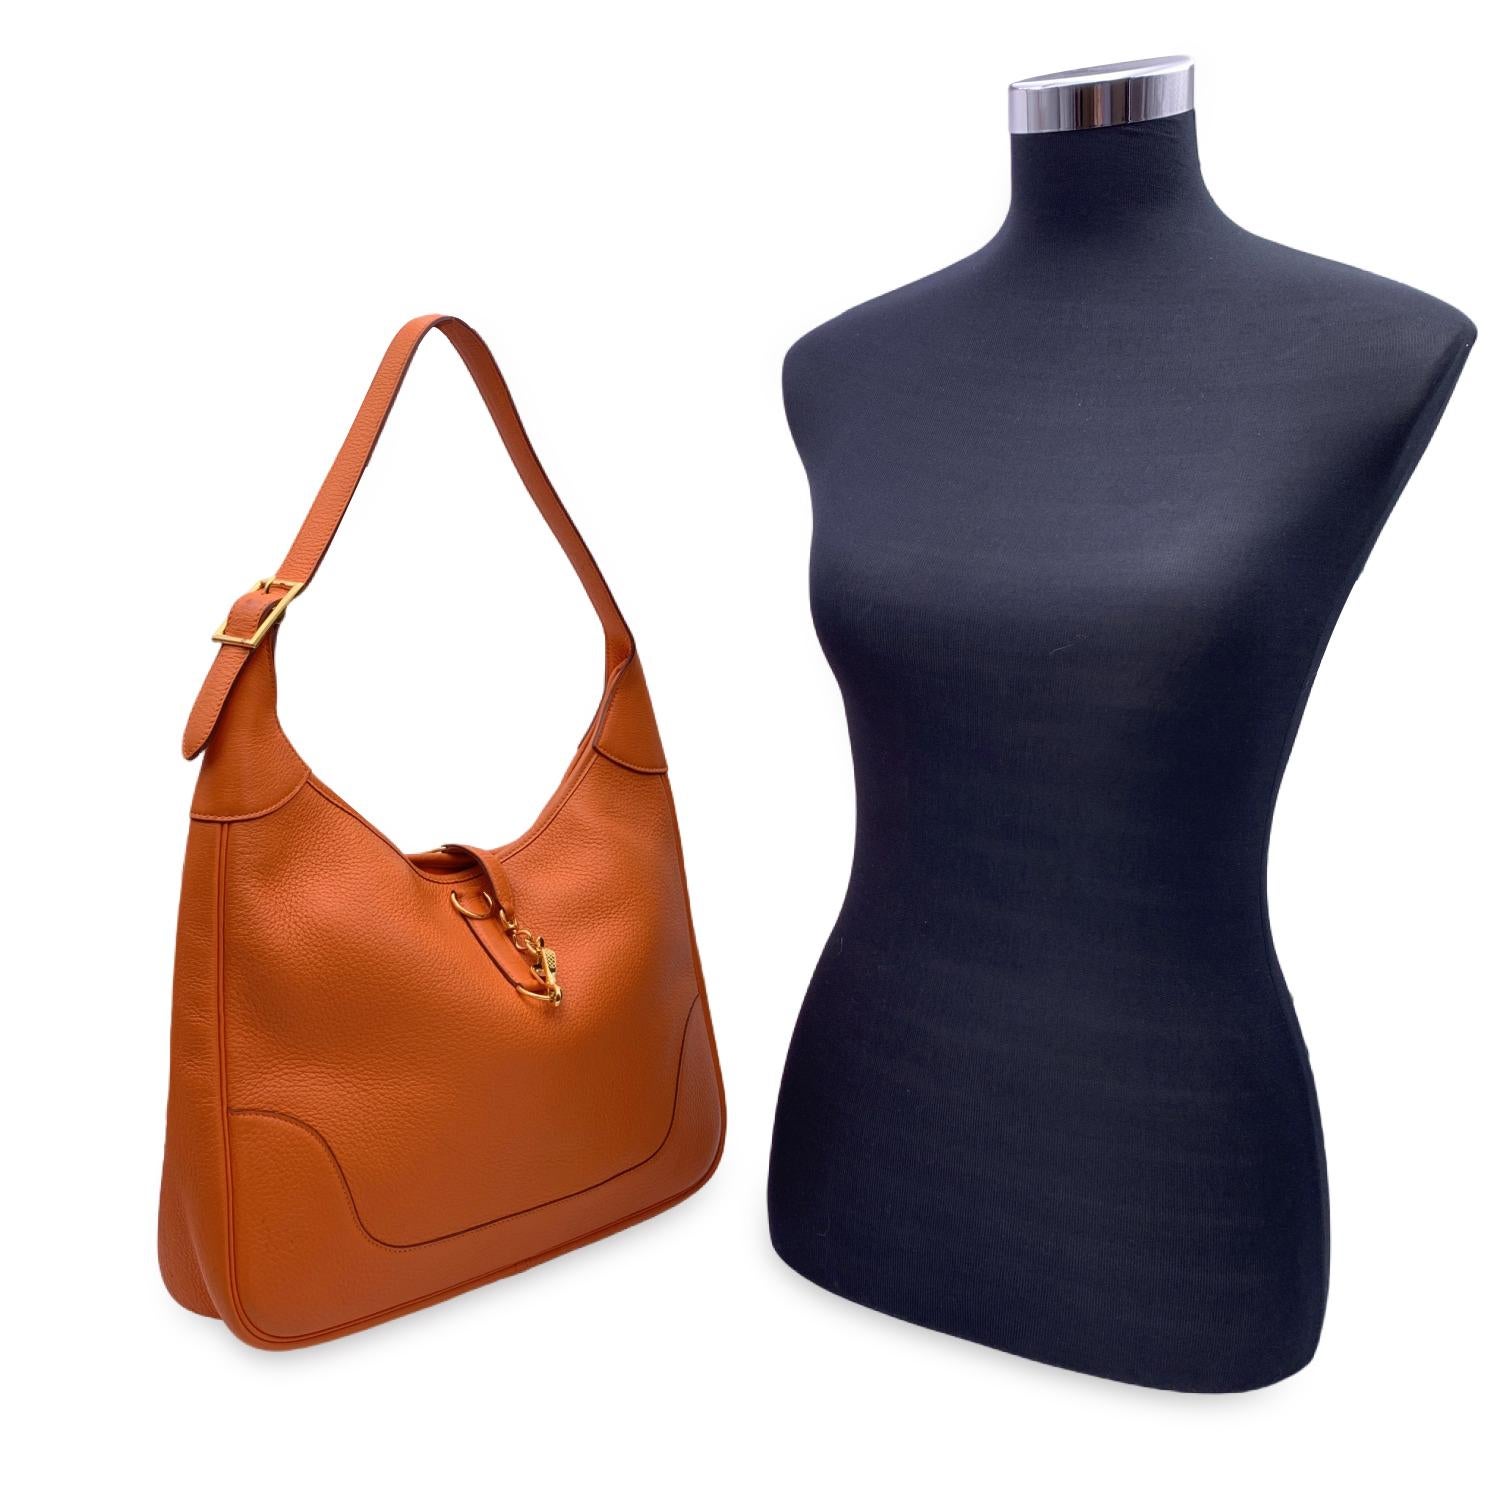 This beautiful Bag will come with a Certificate of Authenticity provided by Entrupy. The certificate will be provided at no further cost.

Super-chic Hermes 'Trim II 35' hobo bag in orange leather. It features an adjustable looping shoulder strap